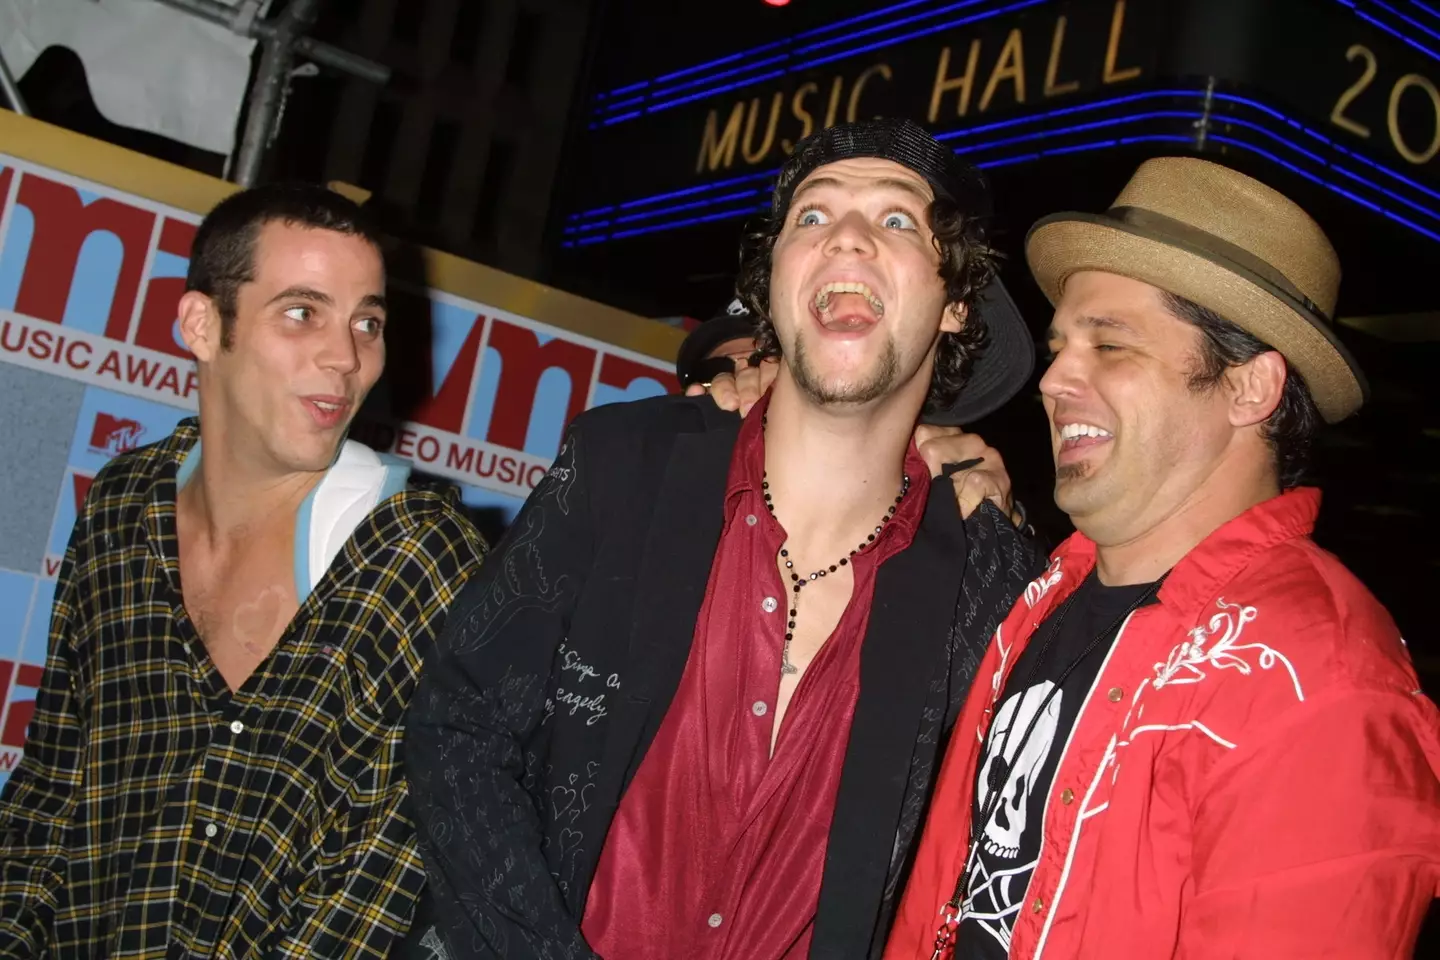 Steve-O has said he’ll ‘never give up’ on Bam Margera.